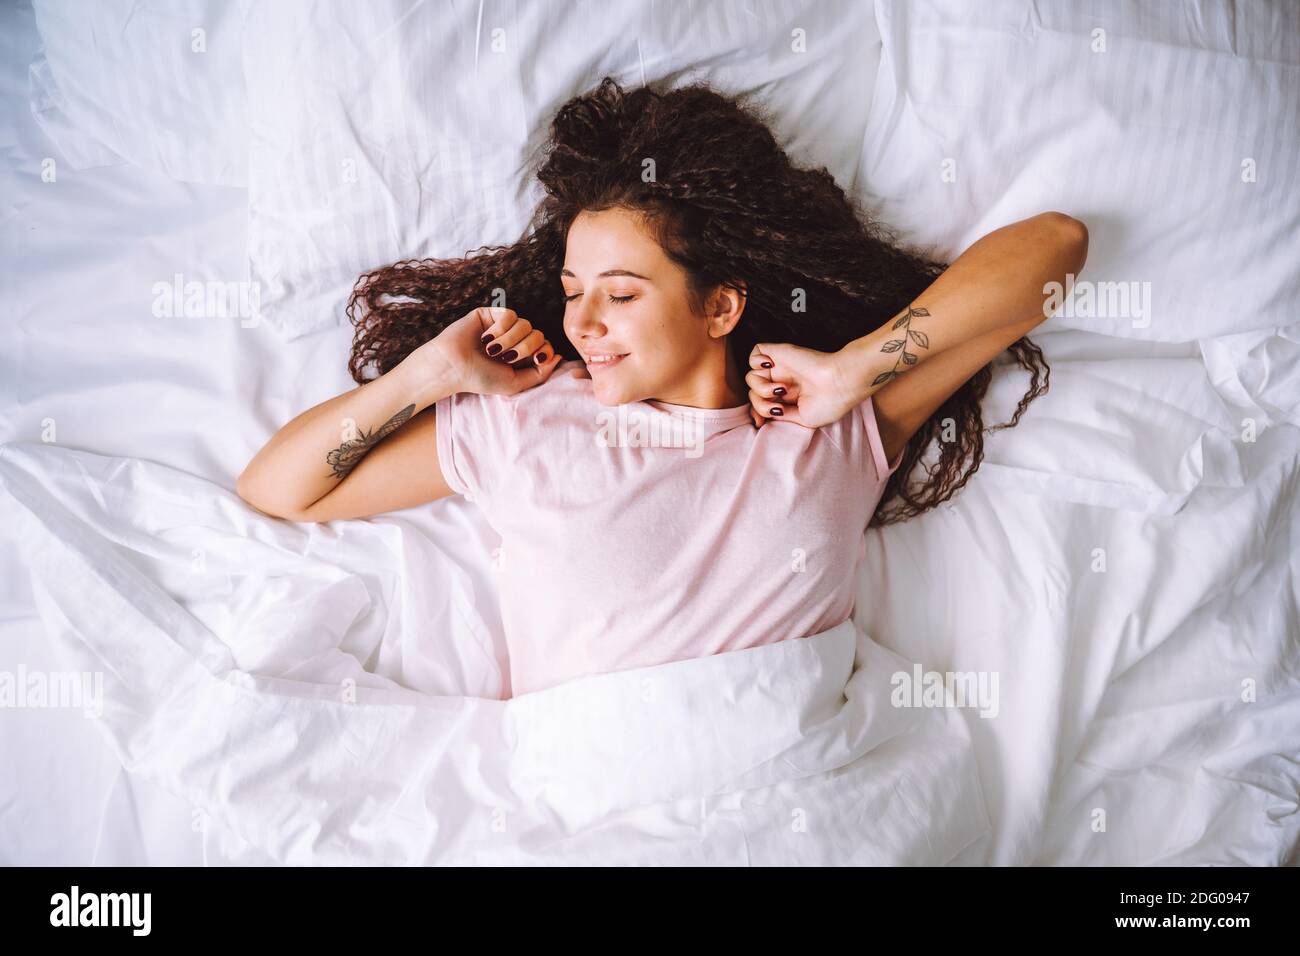 Top view of young woman waking up in early morning lying on bed with snow white linens and sretch her arms and body with smile Stock Photo